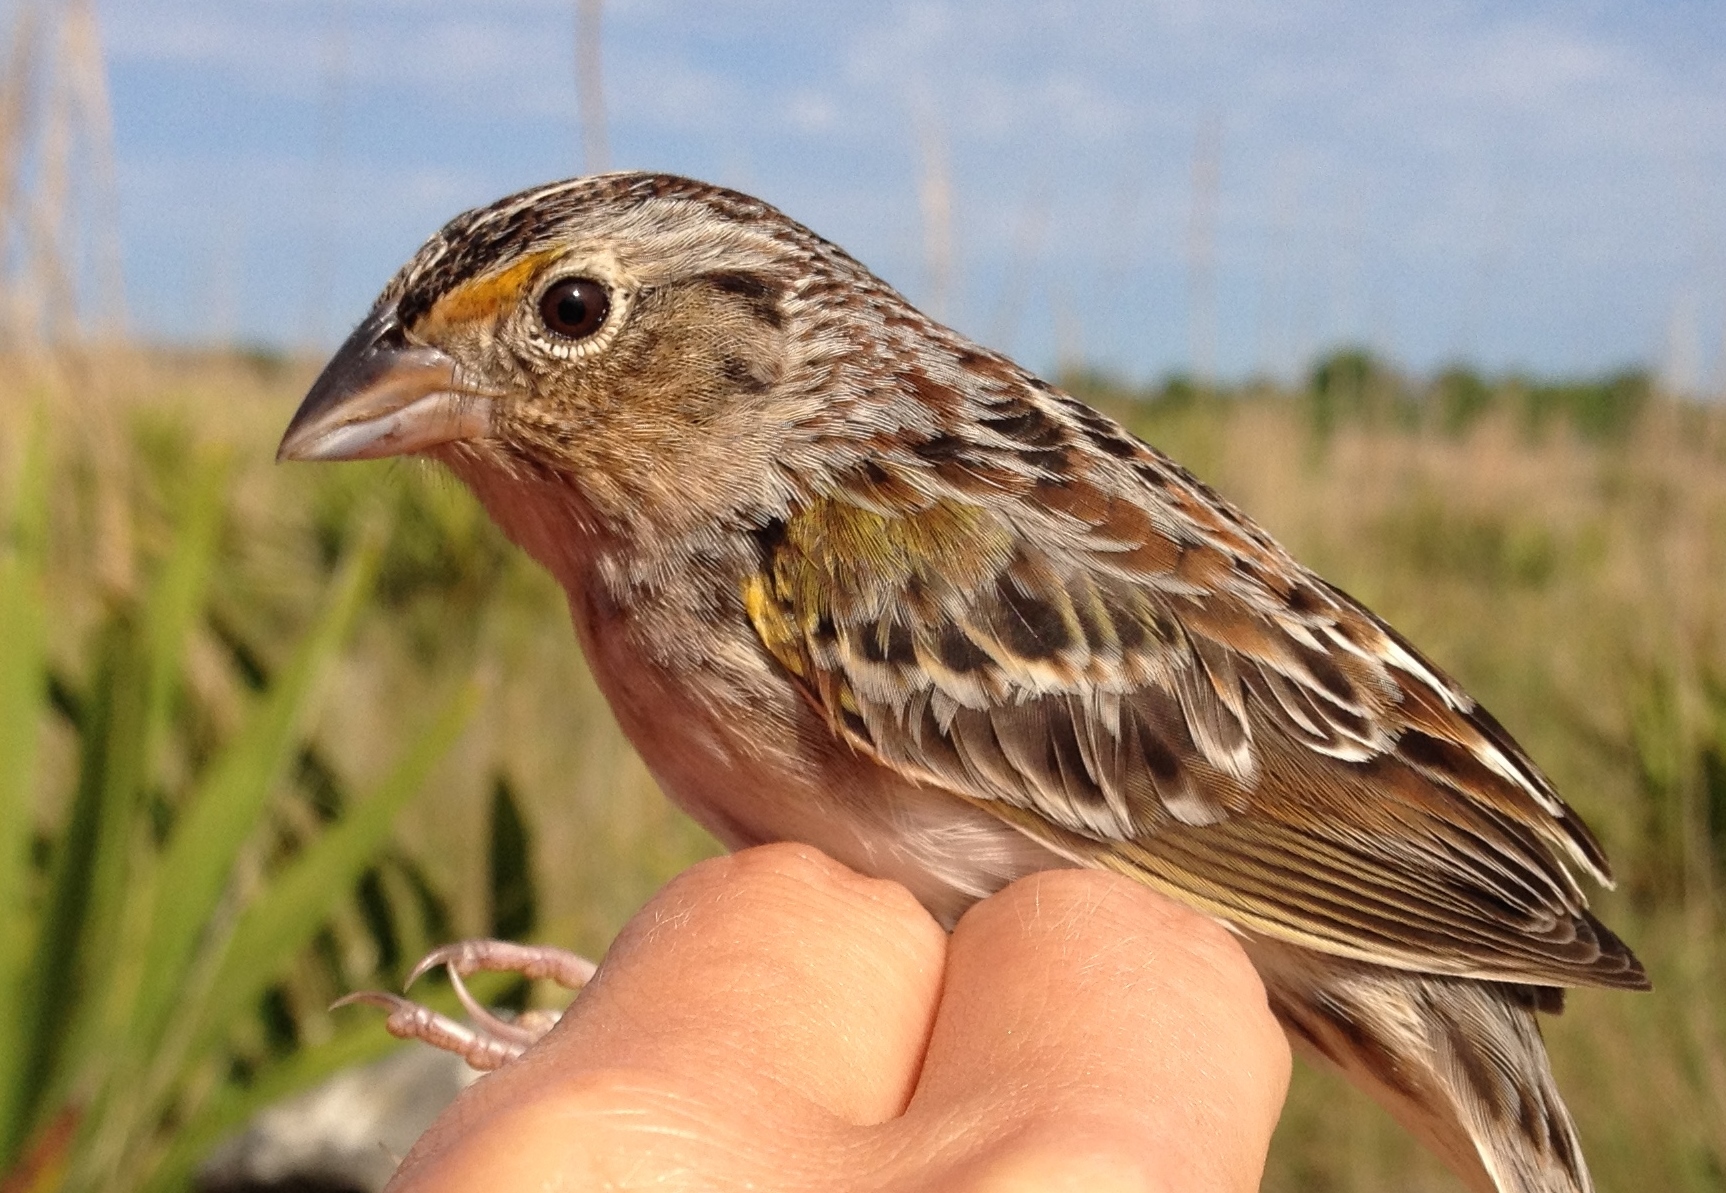 A small brown and black bird held by a hand in a coastal marsh